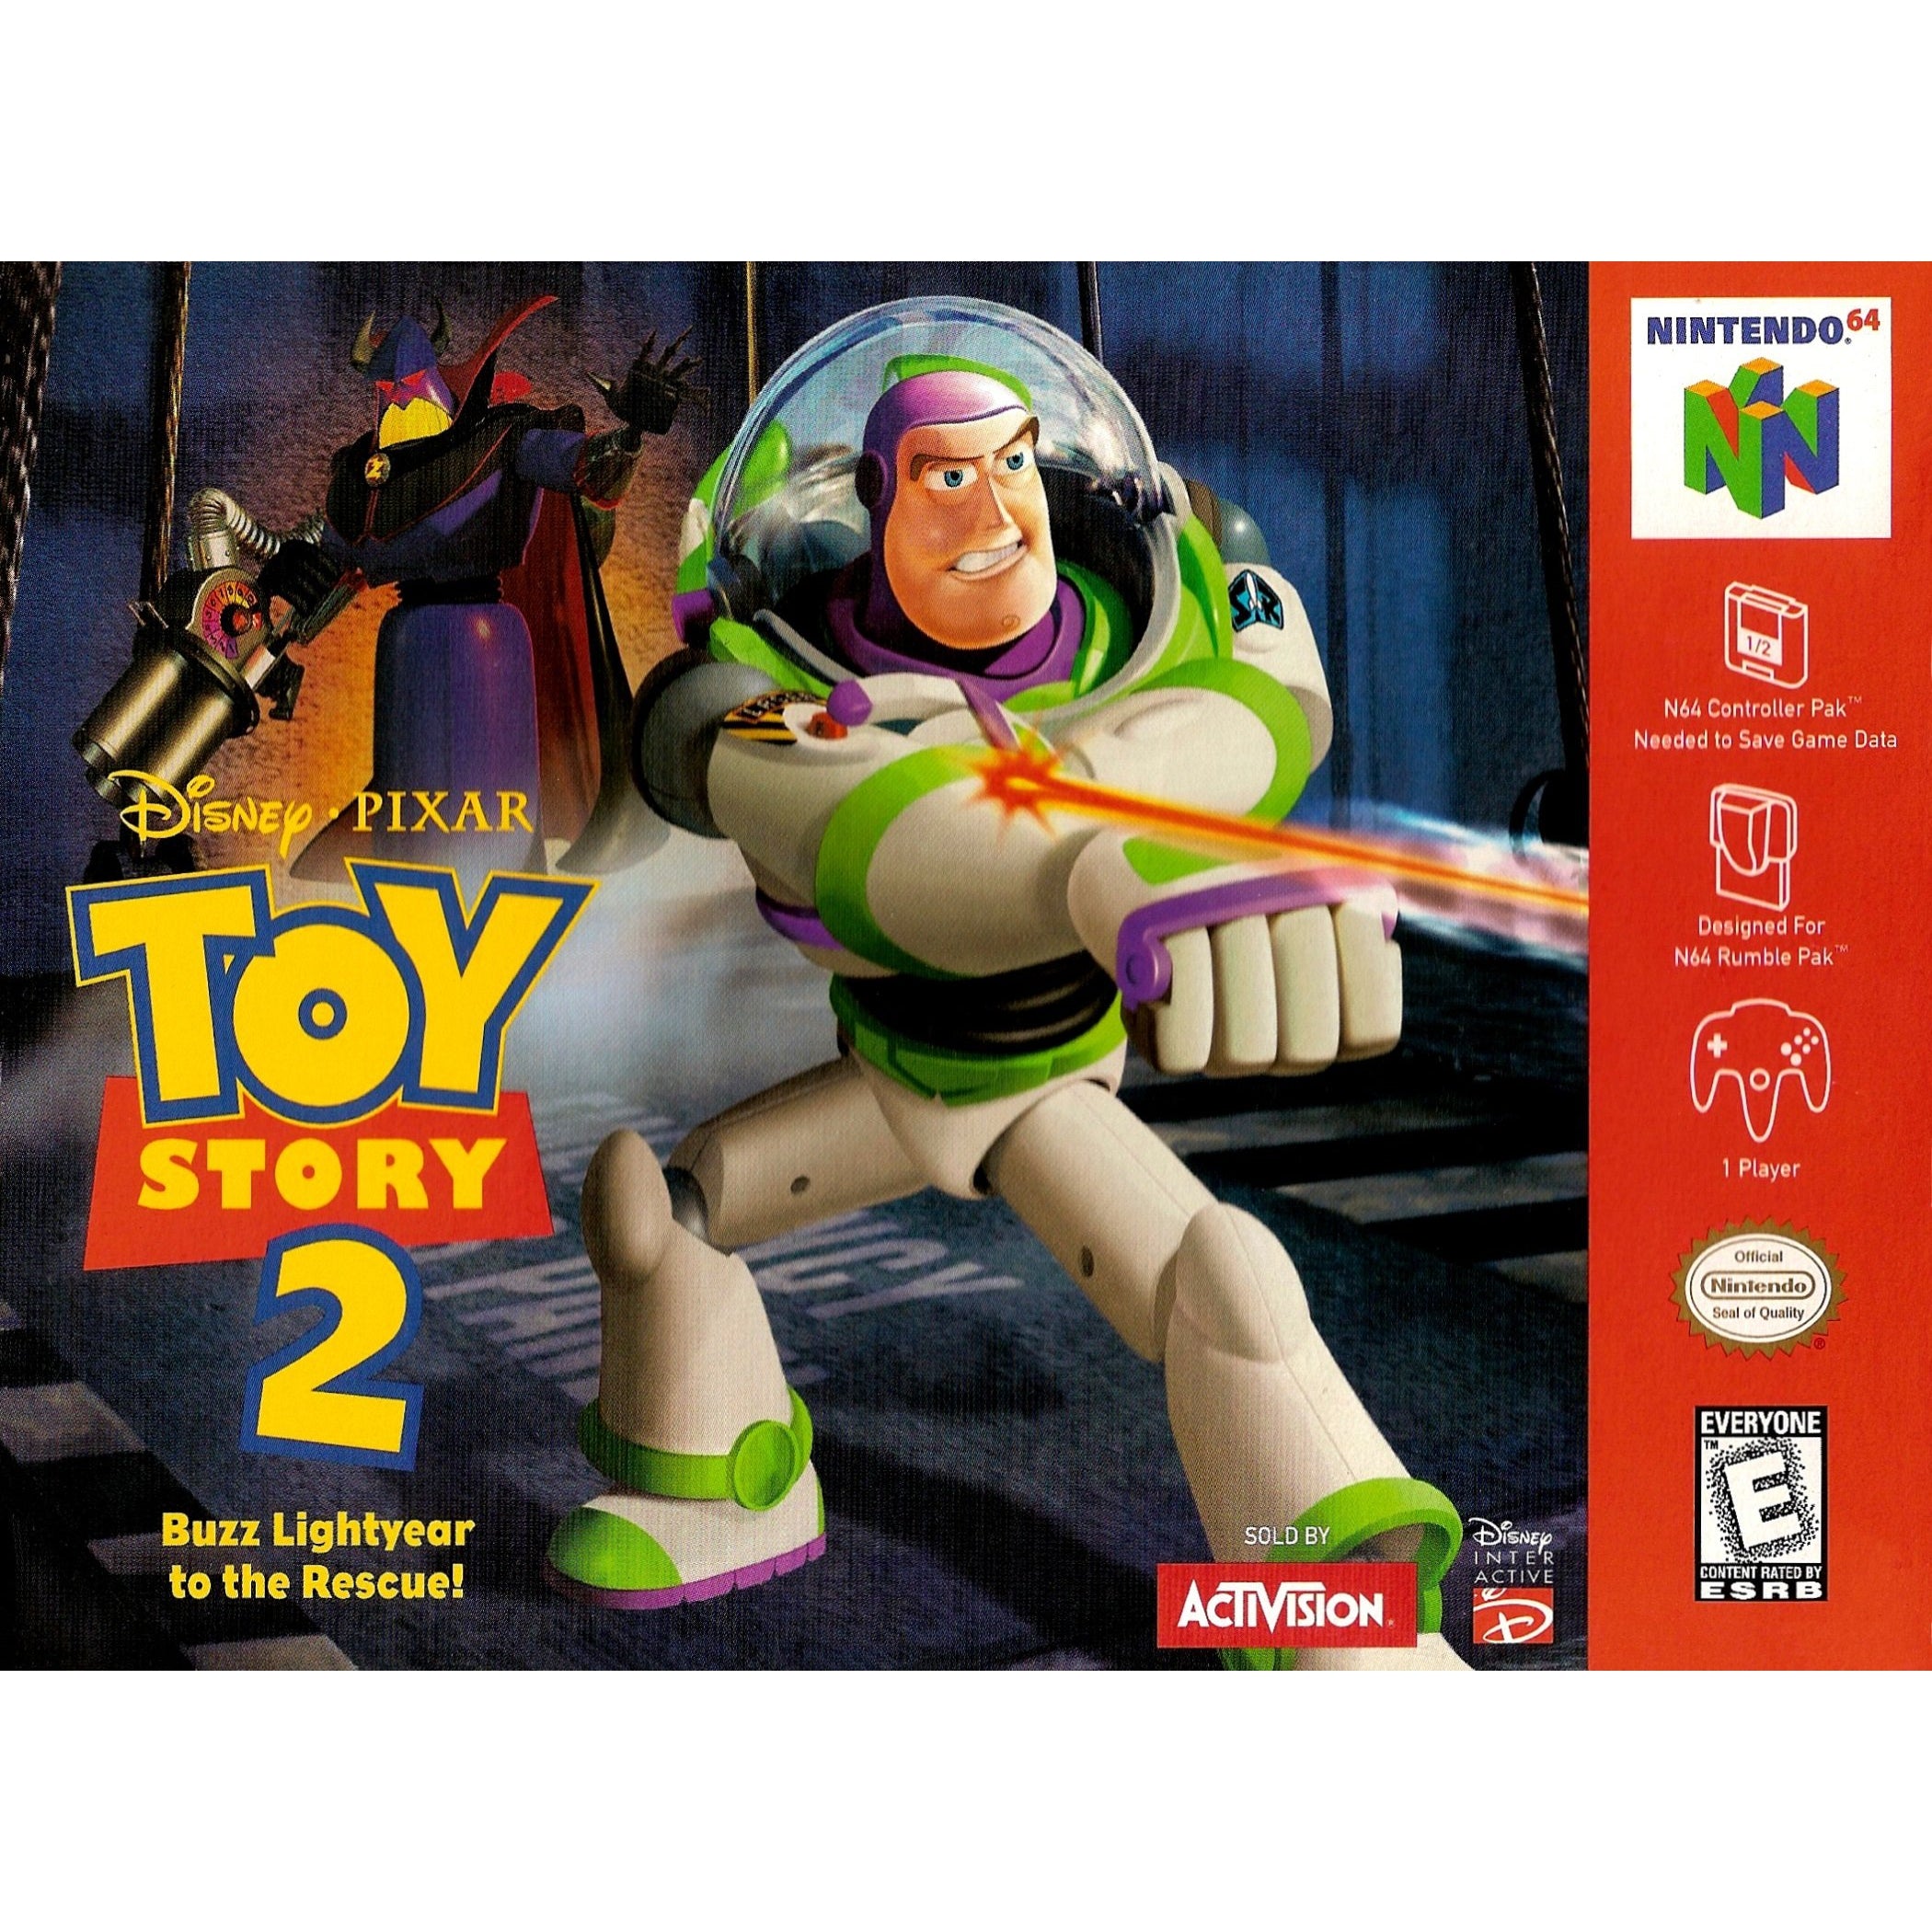 Toy Story 2: Buzz Lightyear to the Rescue! - Authentic Nintendo 64 (N64) Game Cartridge - YourGamingShop.com - Buy, Sell, Trade Video Games Online. 120 Day Warranty. Satisfaction Guaranteed.